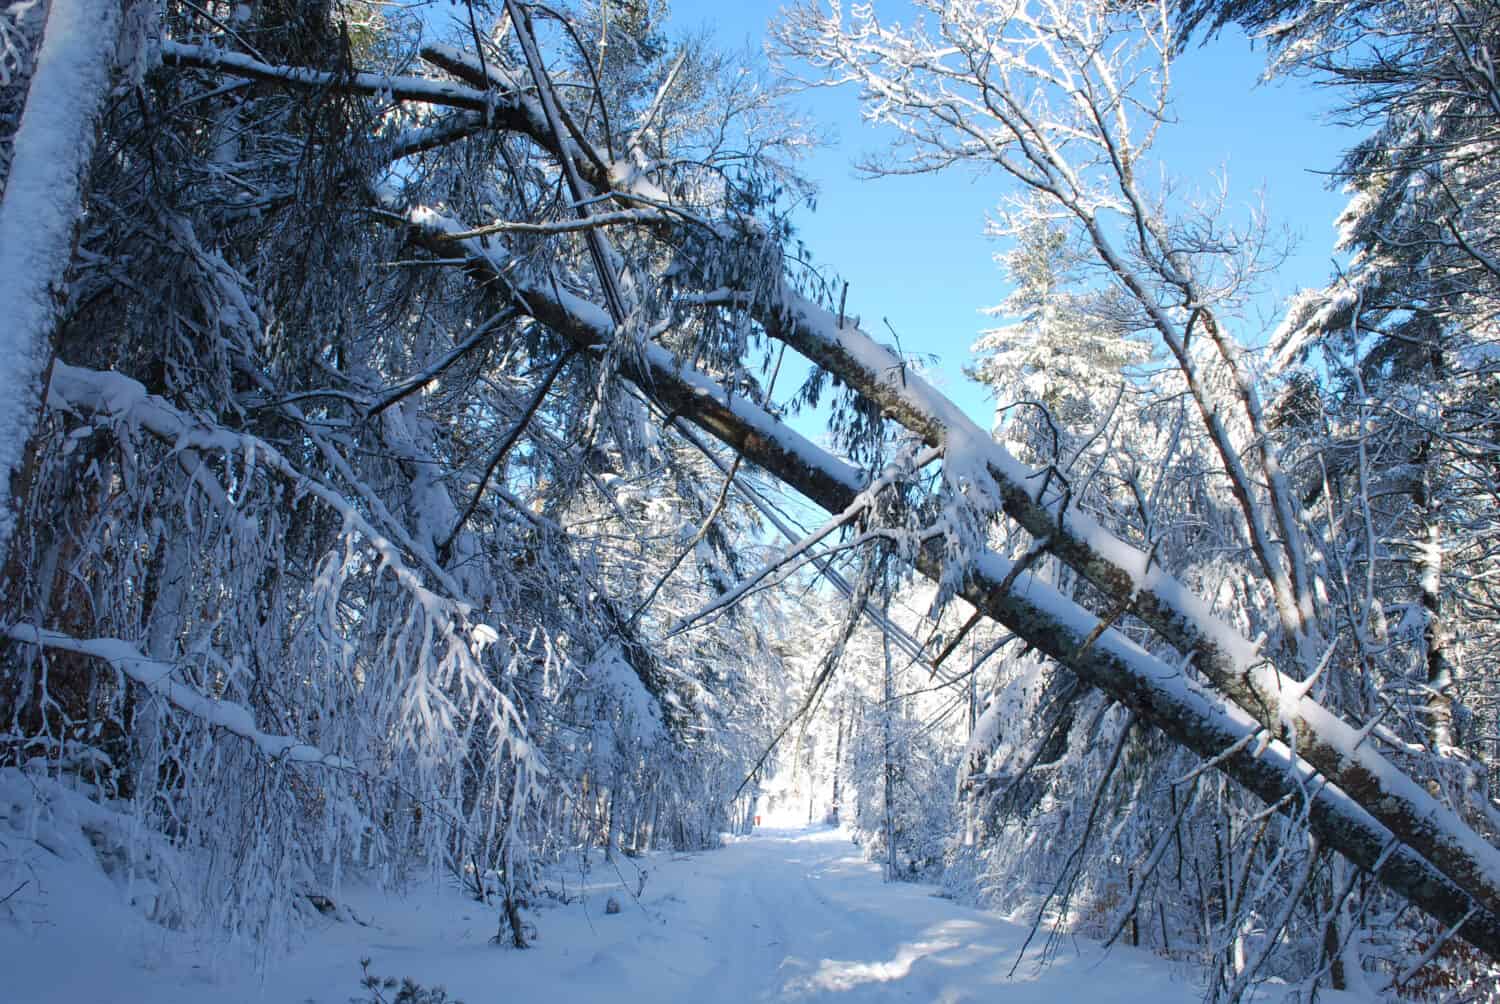 Cold snowy forest with trees fallen down from a brizzard 